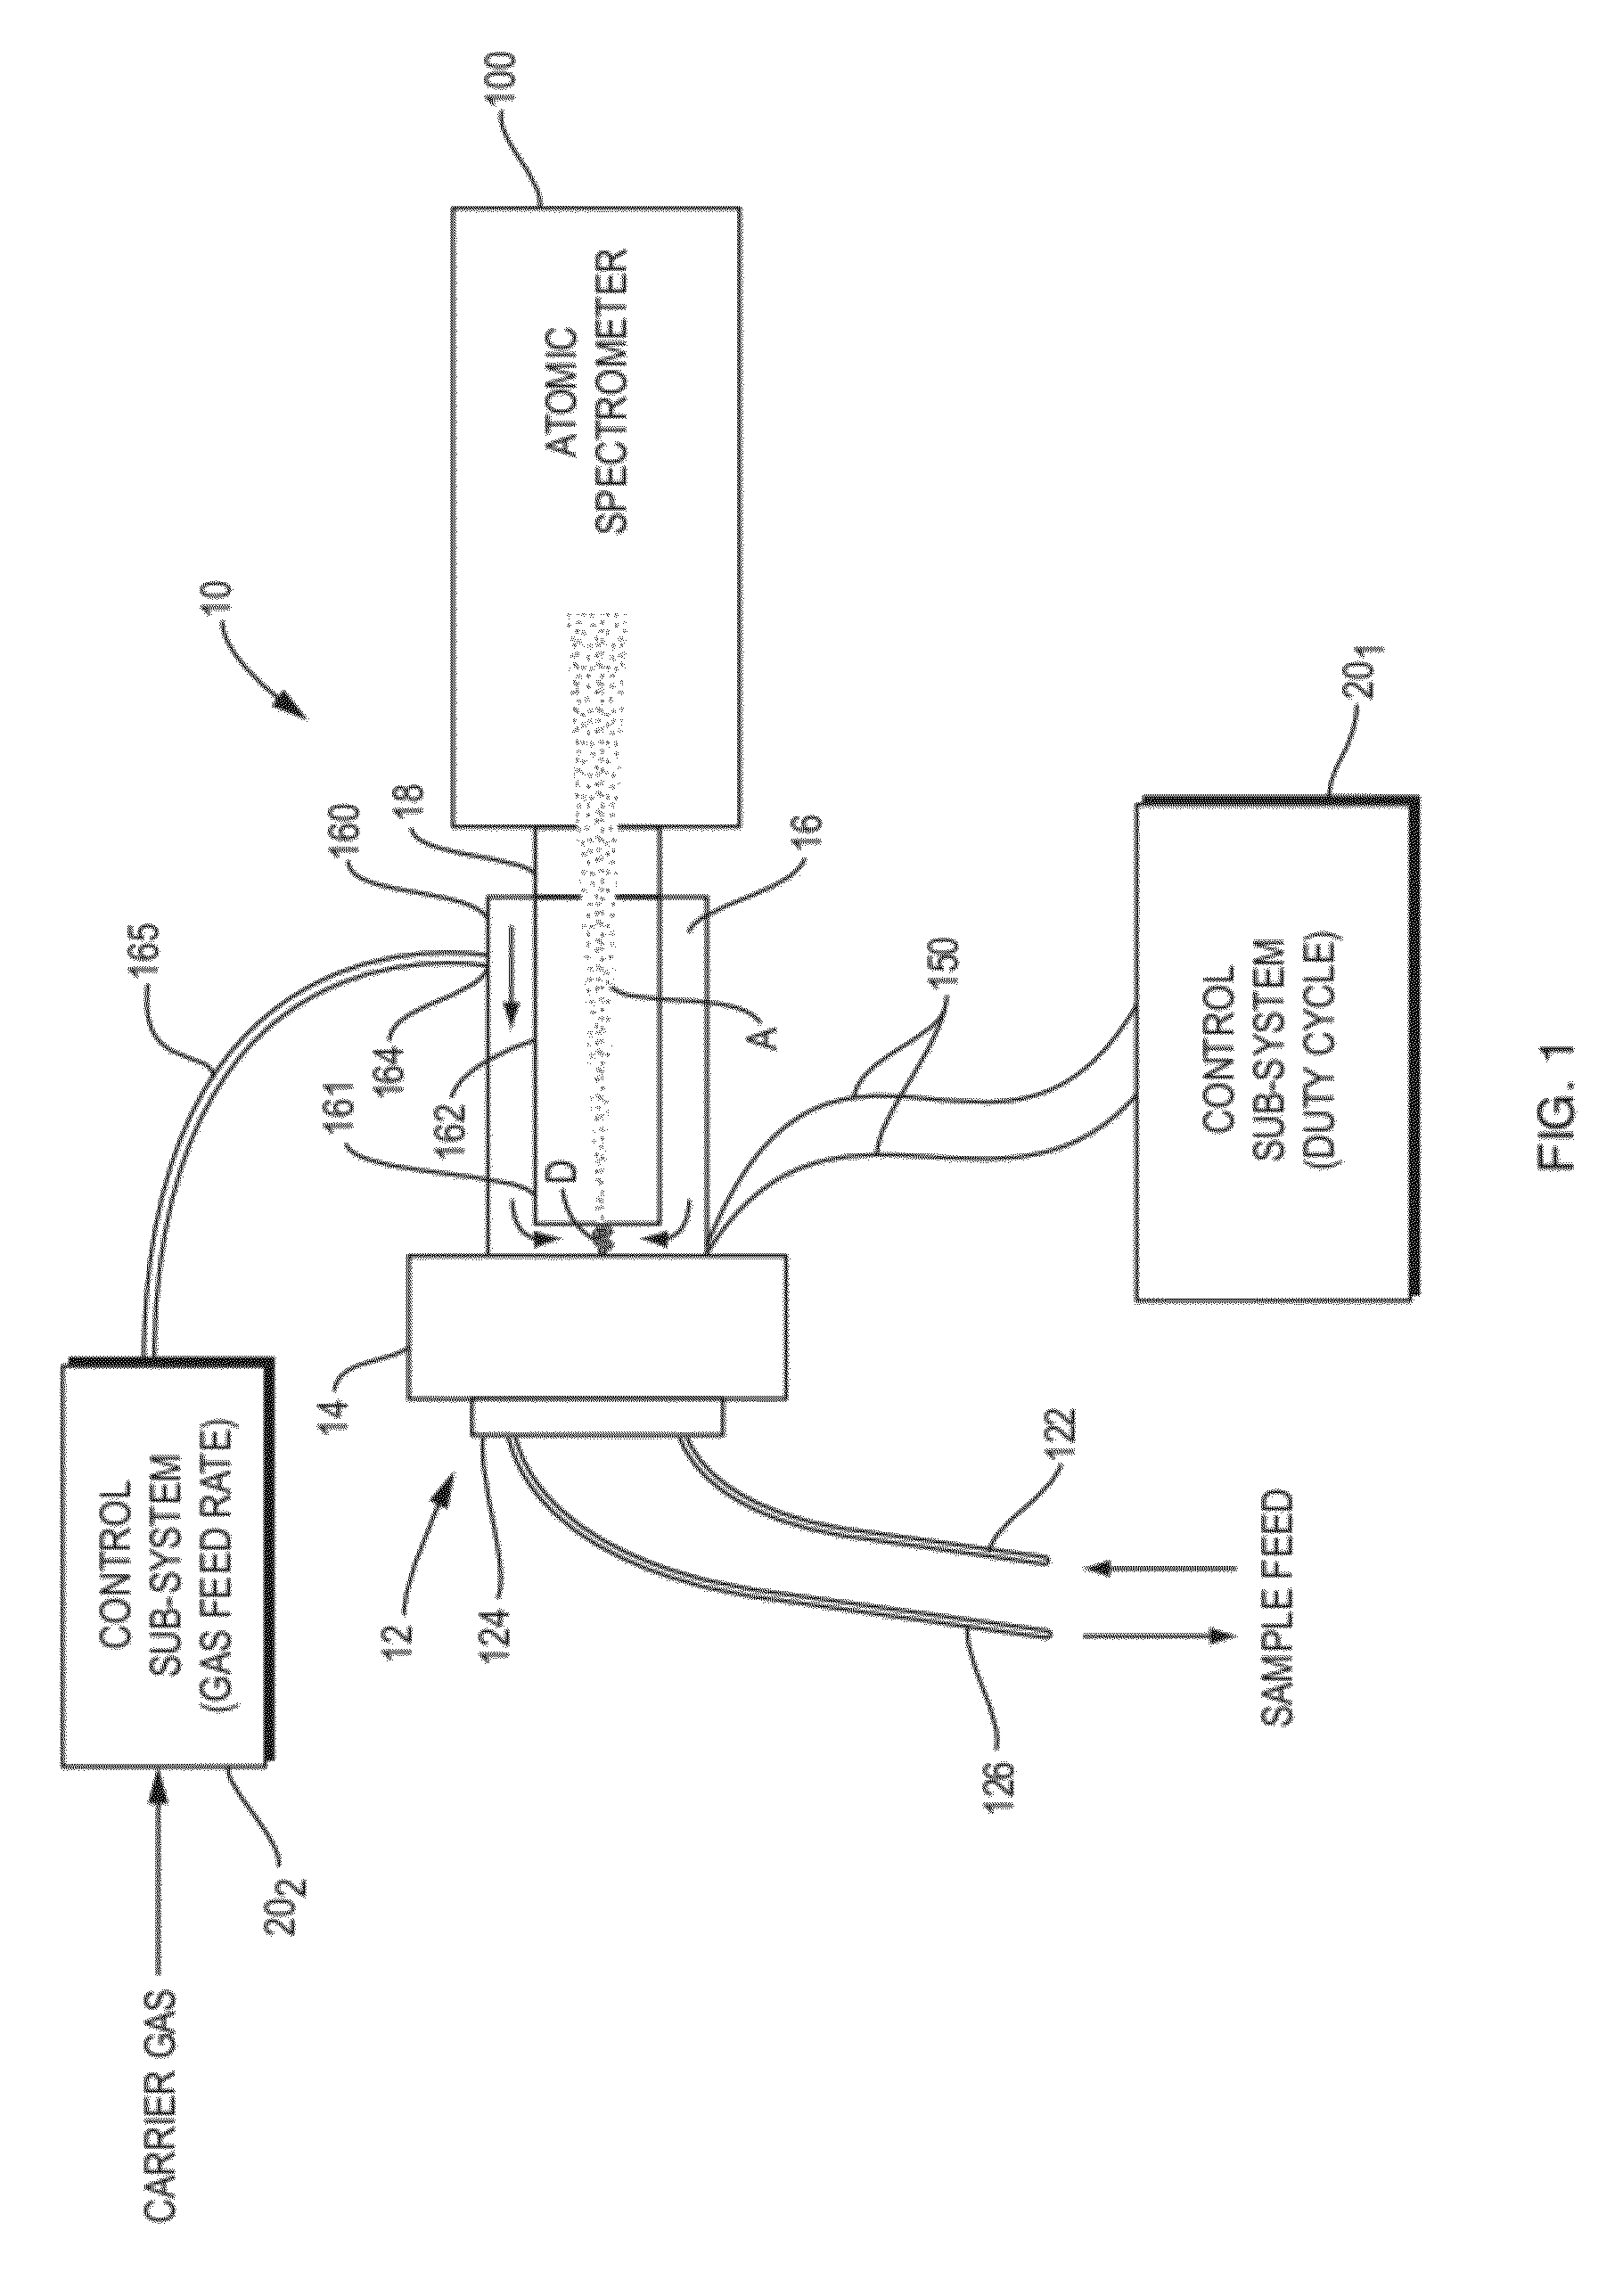 Sample introduction method and system for atomic spectrometry